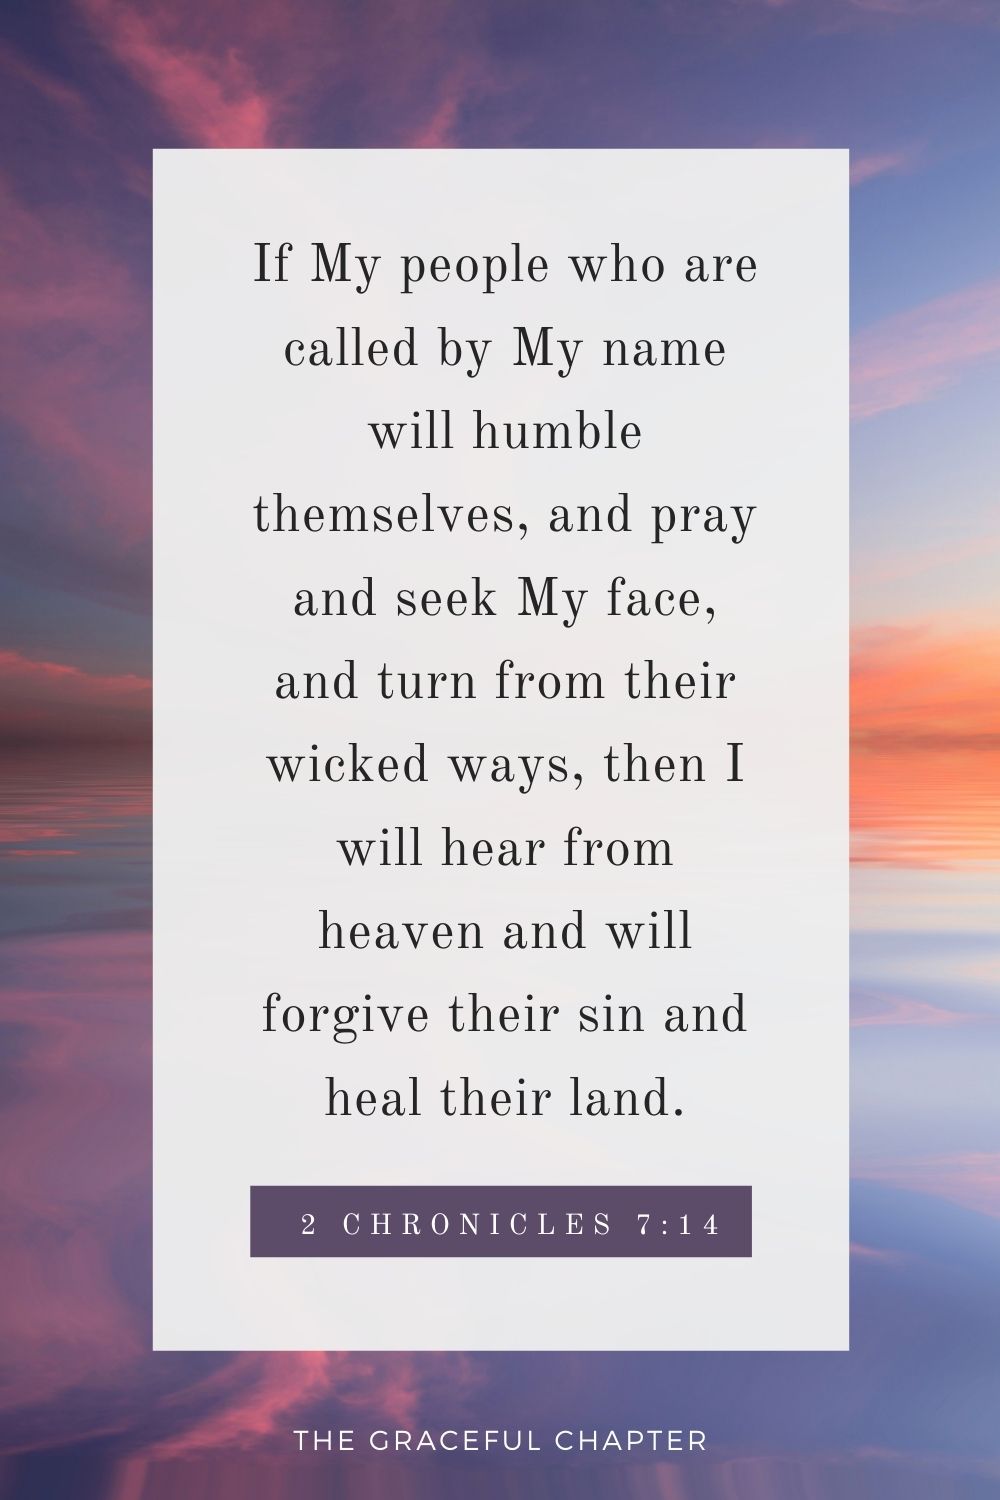 If My people who are called by My name will humble themselves, and pray and seek My face, and turn from their wicked ways, then I will hear from heaven and will forgive their sin and heal their land. 2 Chronicles 7:14